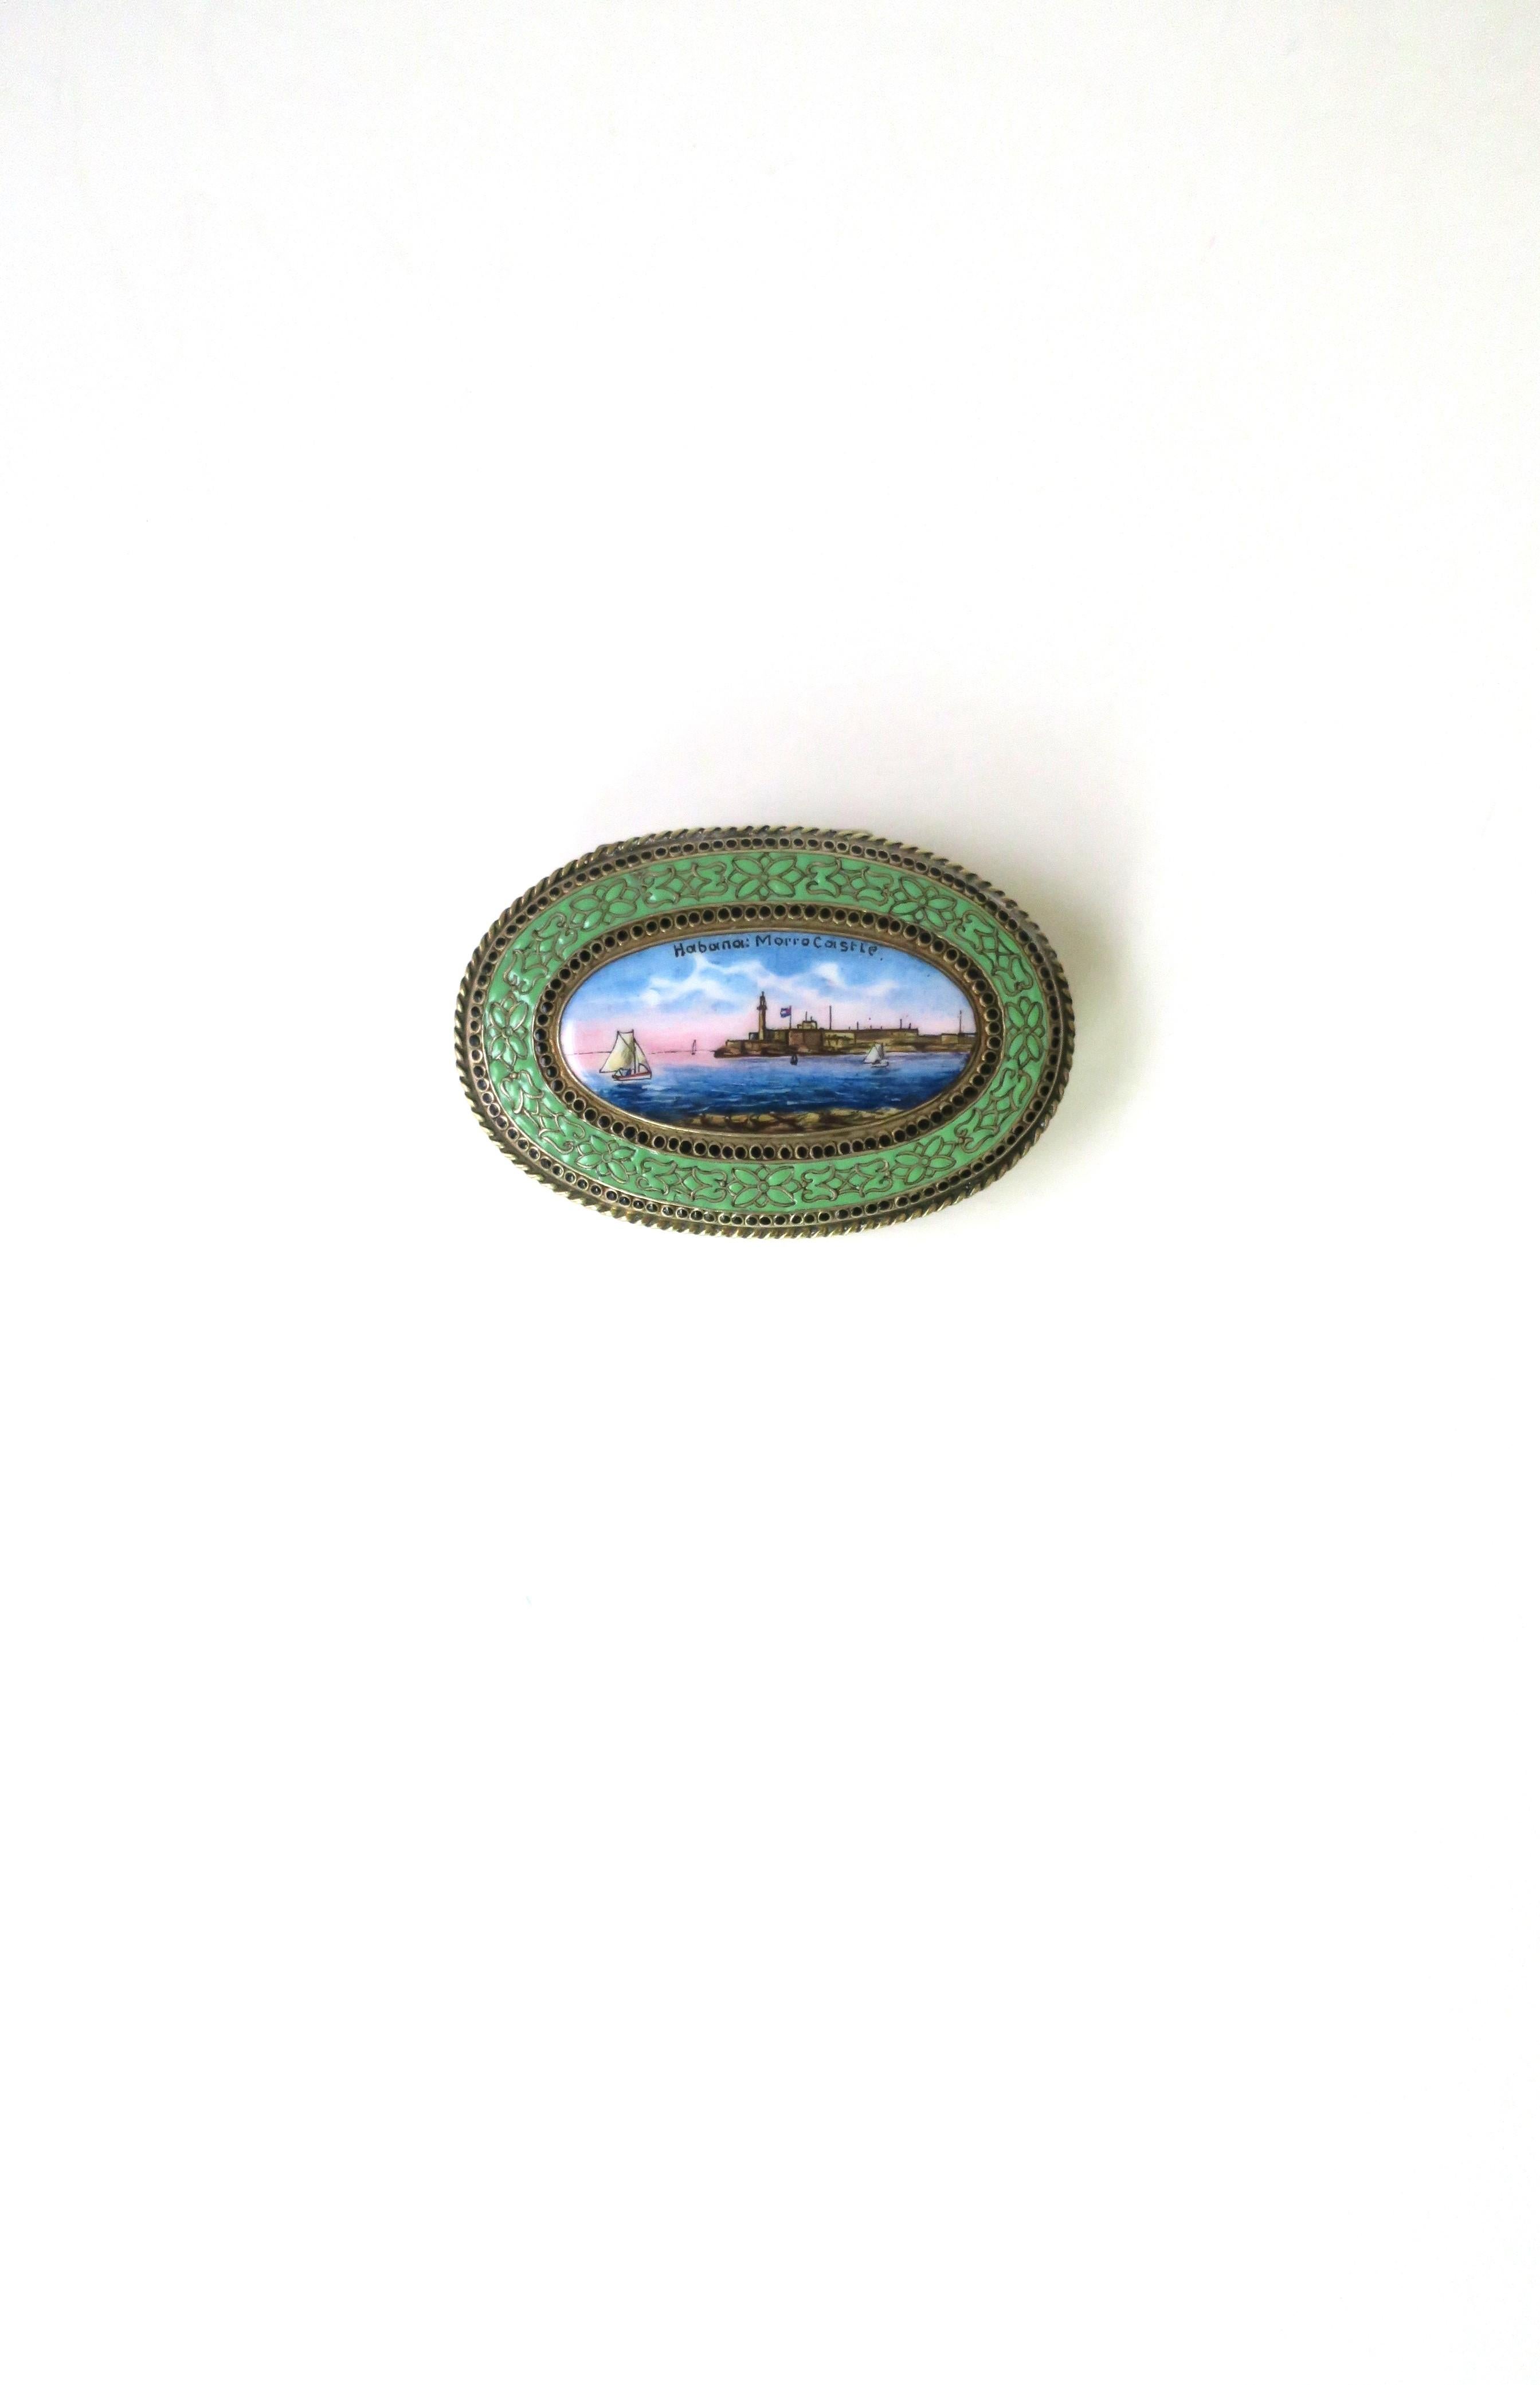 An oval metal and enamel trinket box with scene from Cuba. Box is made of alpacca metal (marked as shown in last image) with an enamel top depicting a sailboat, ocean water, and castle scene (Morro Castle), Havana, (Habana), Cuba. Across top reads